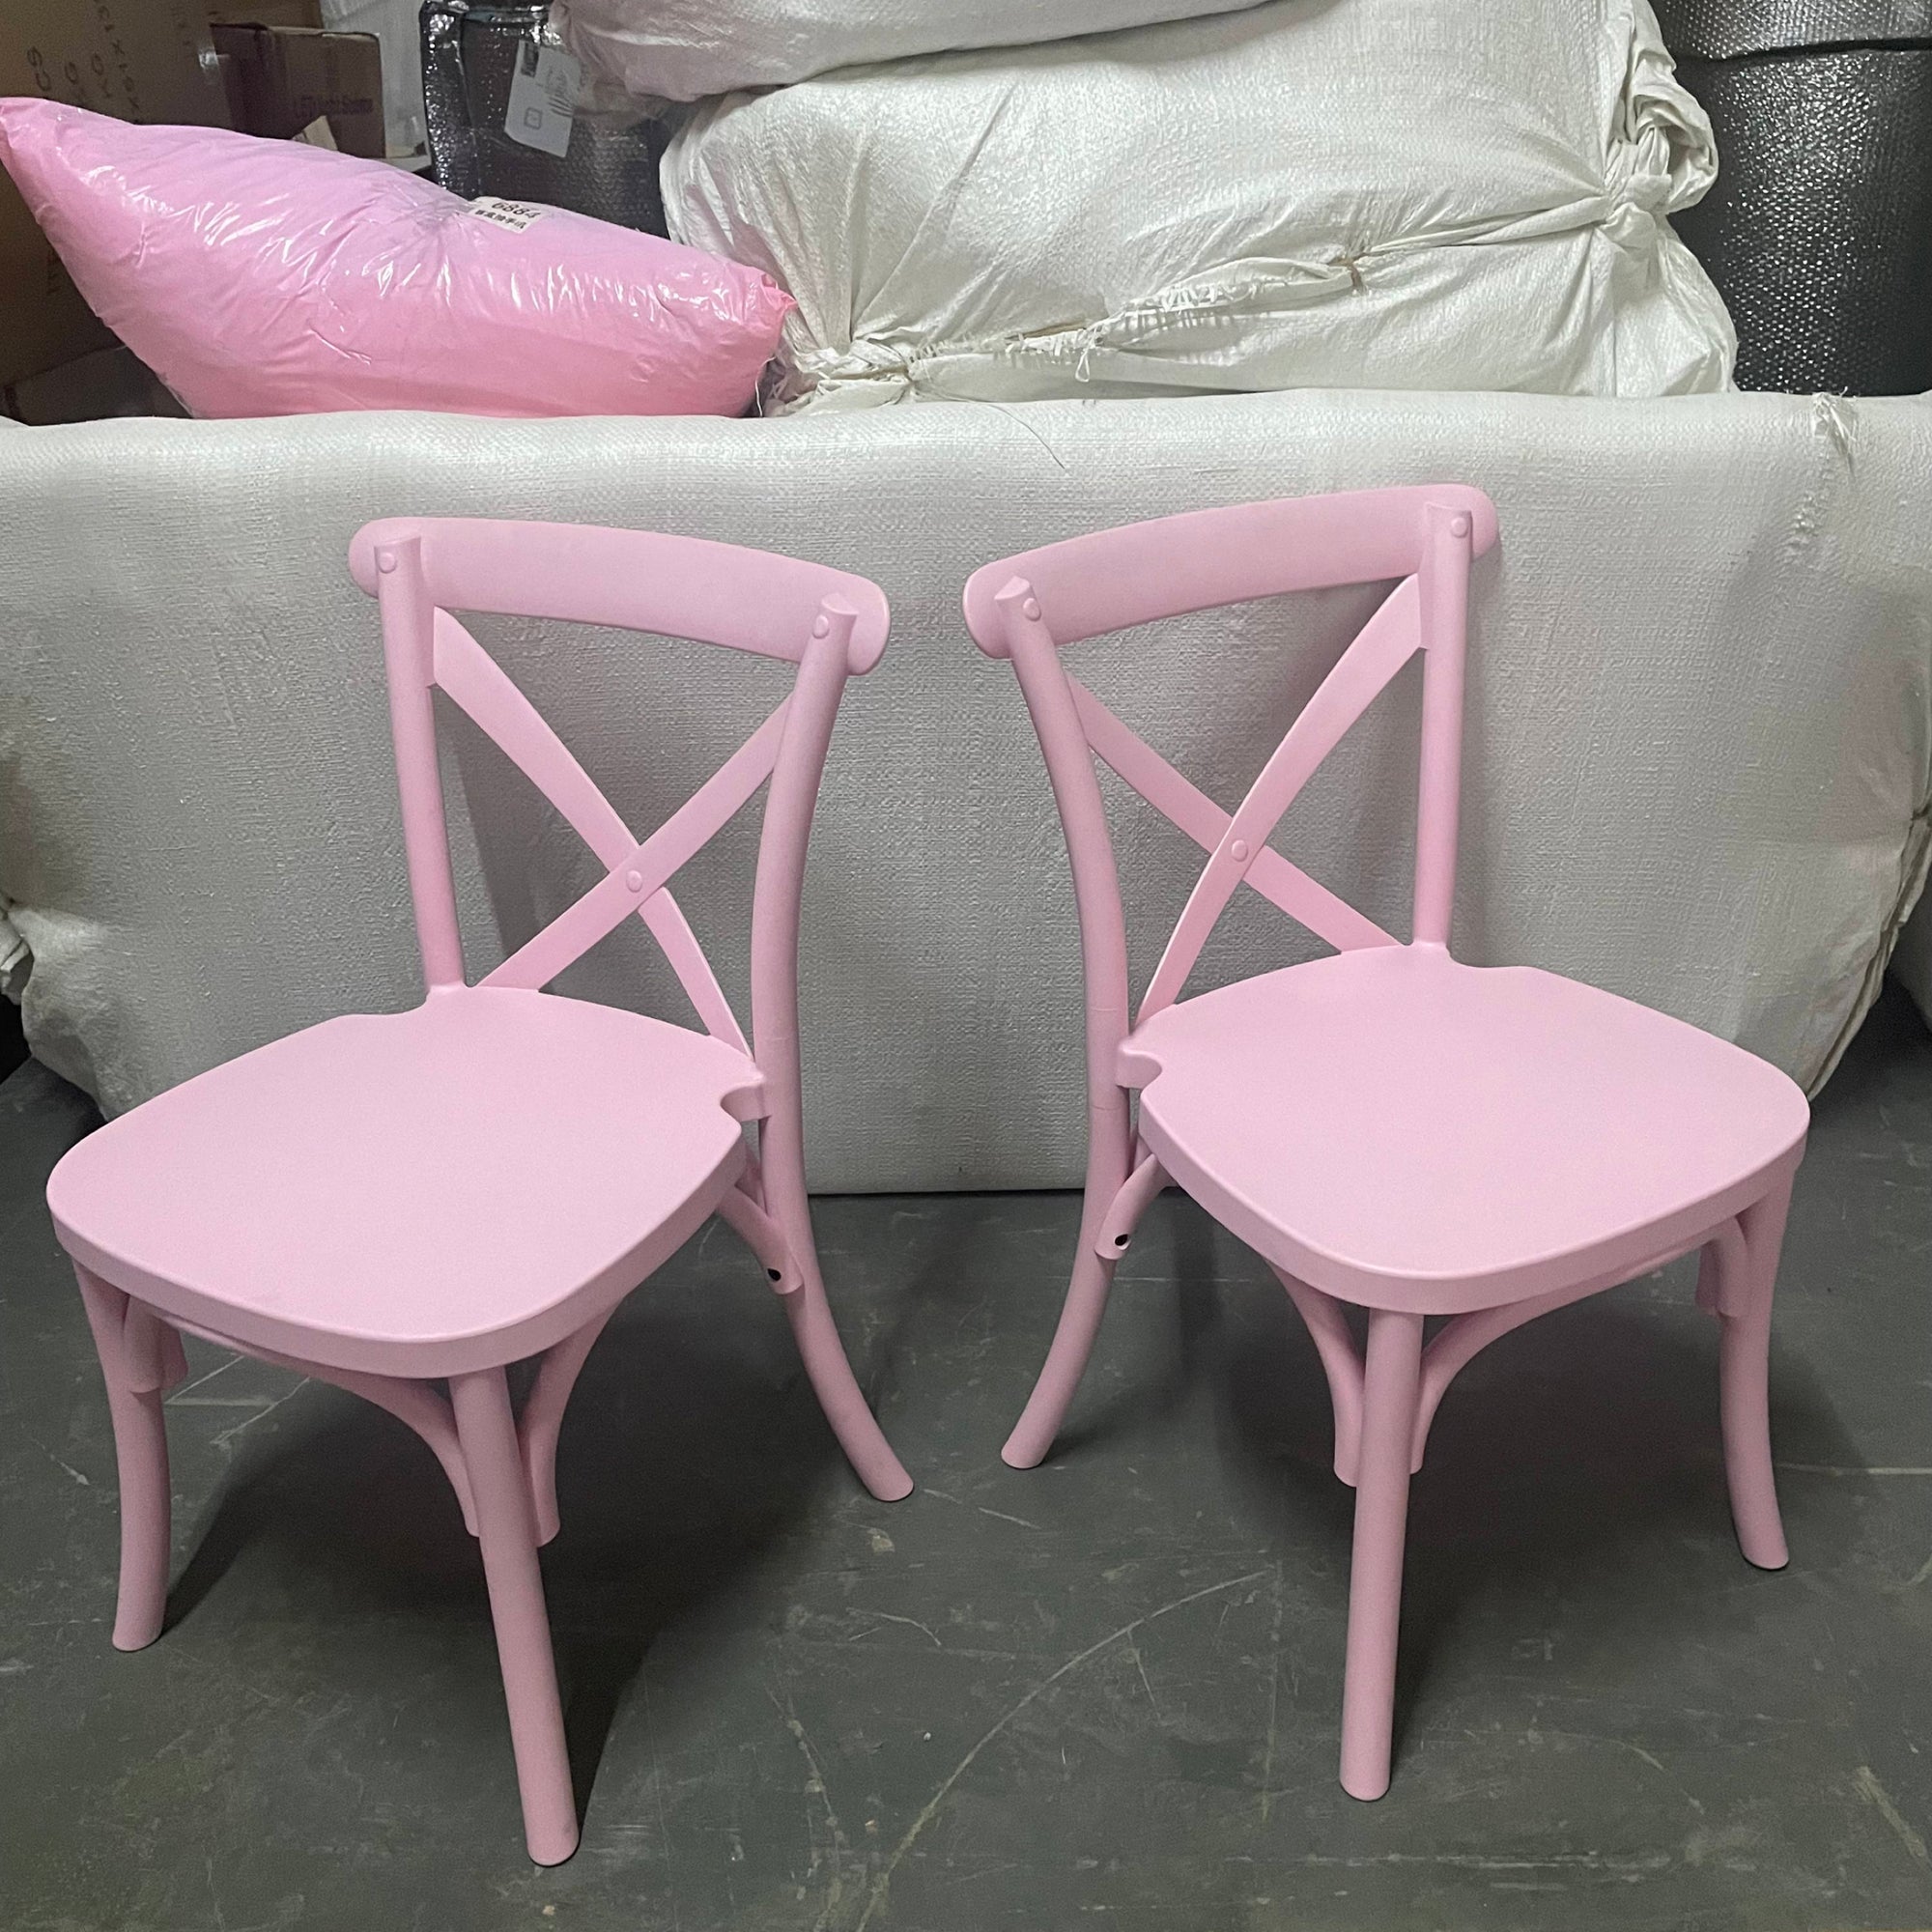 Pink Cross-Back Chairs